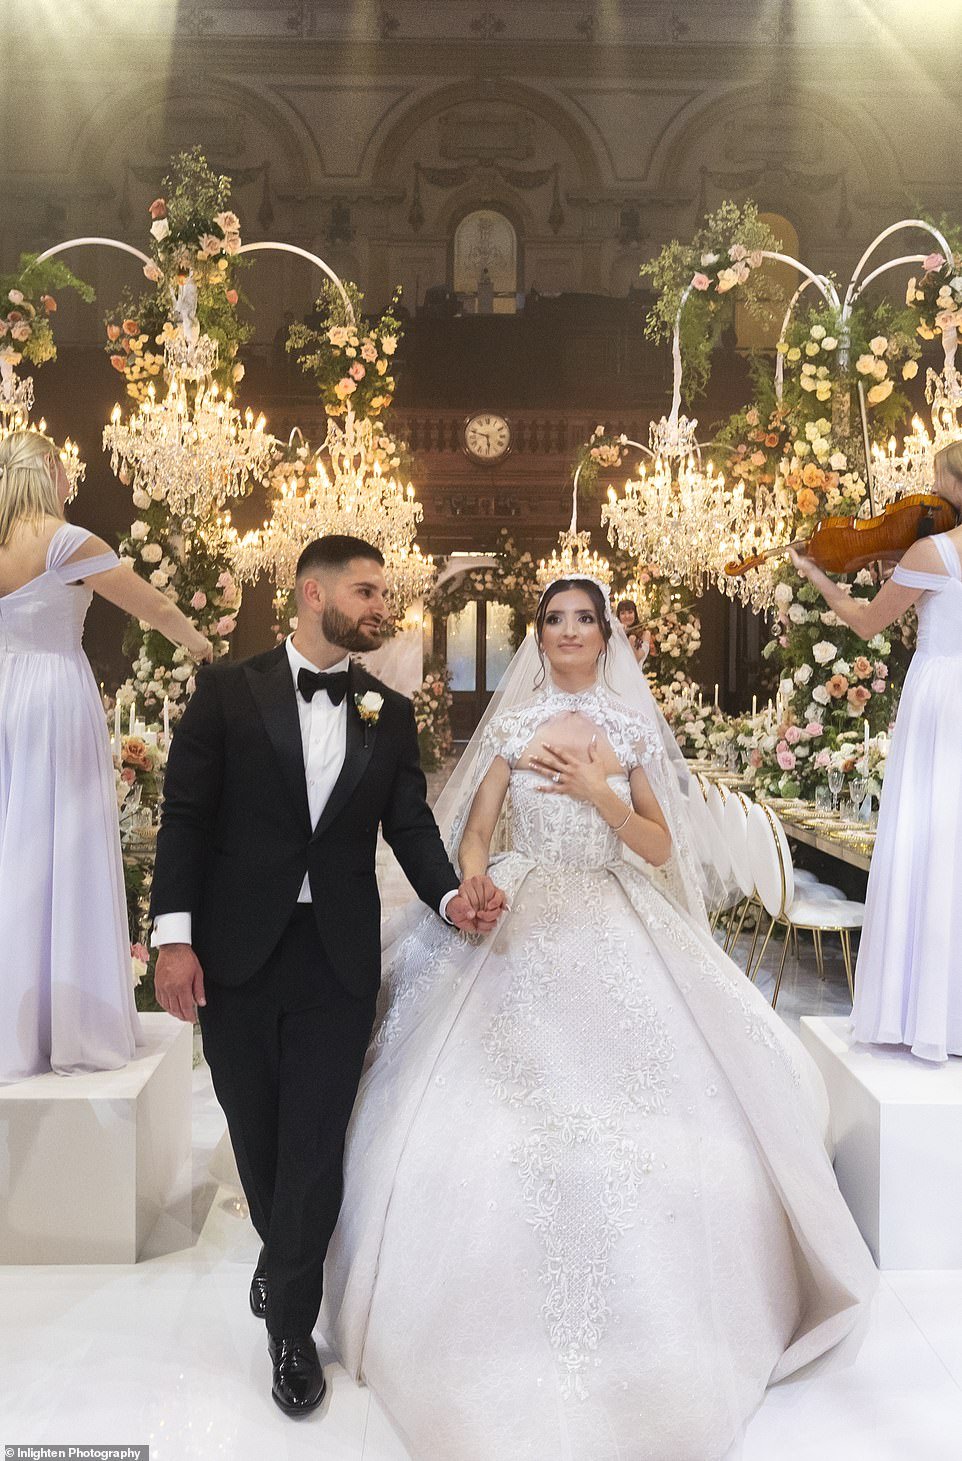 Linda Estephan and Amanuel Khoury got married on October 14 in a dream ceremony that took 1,000 hours to complete